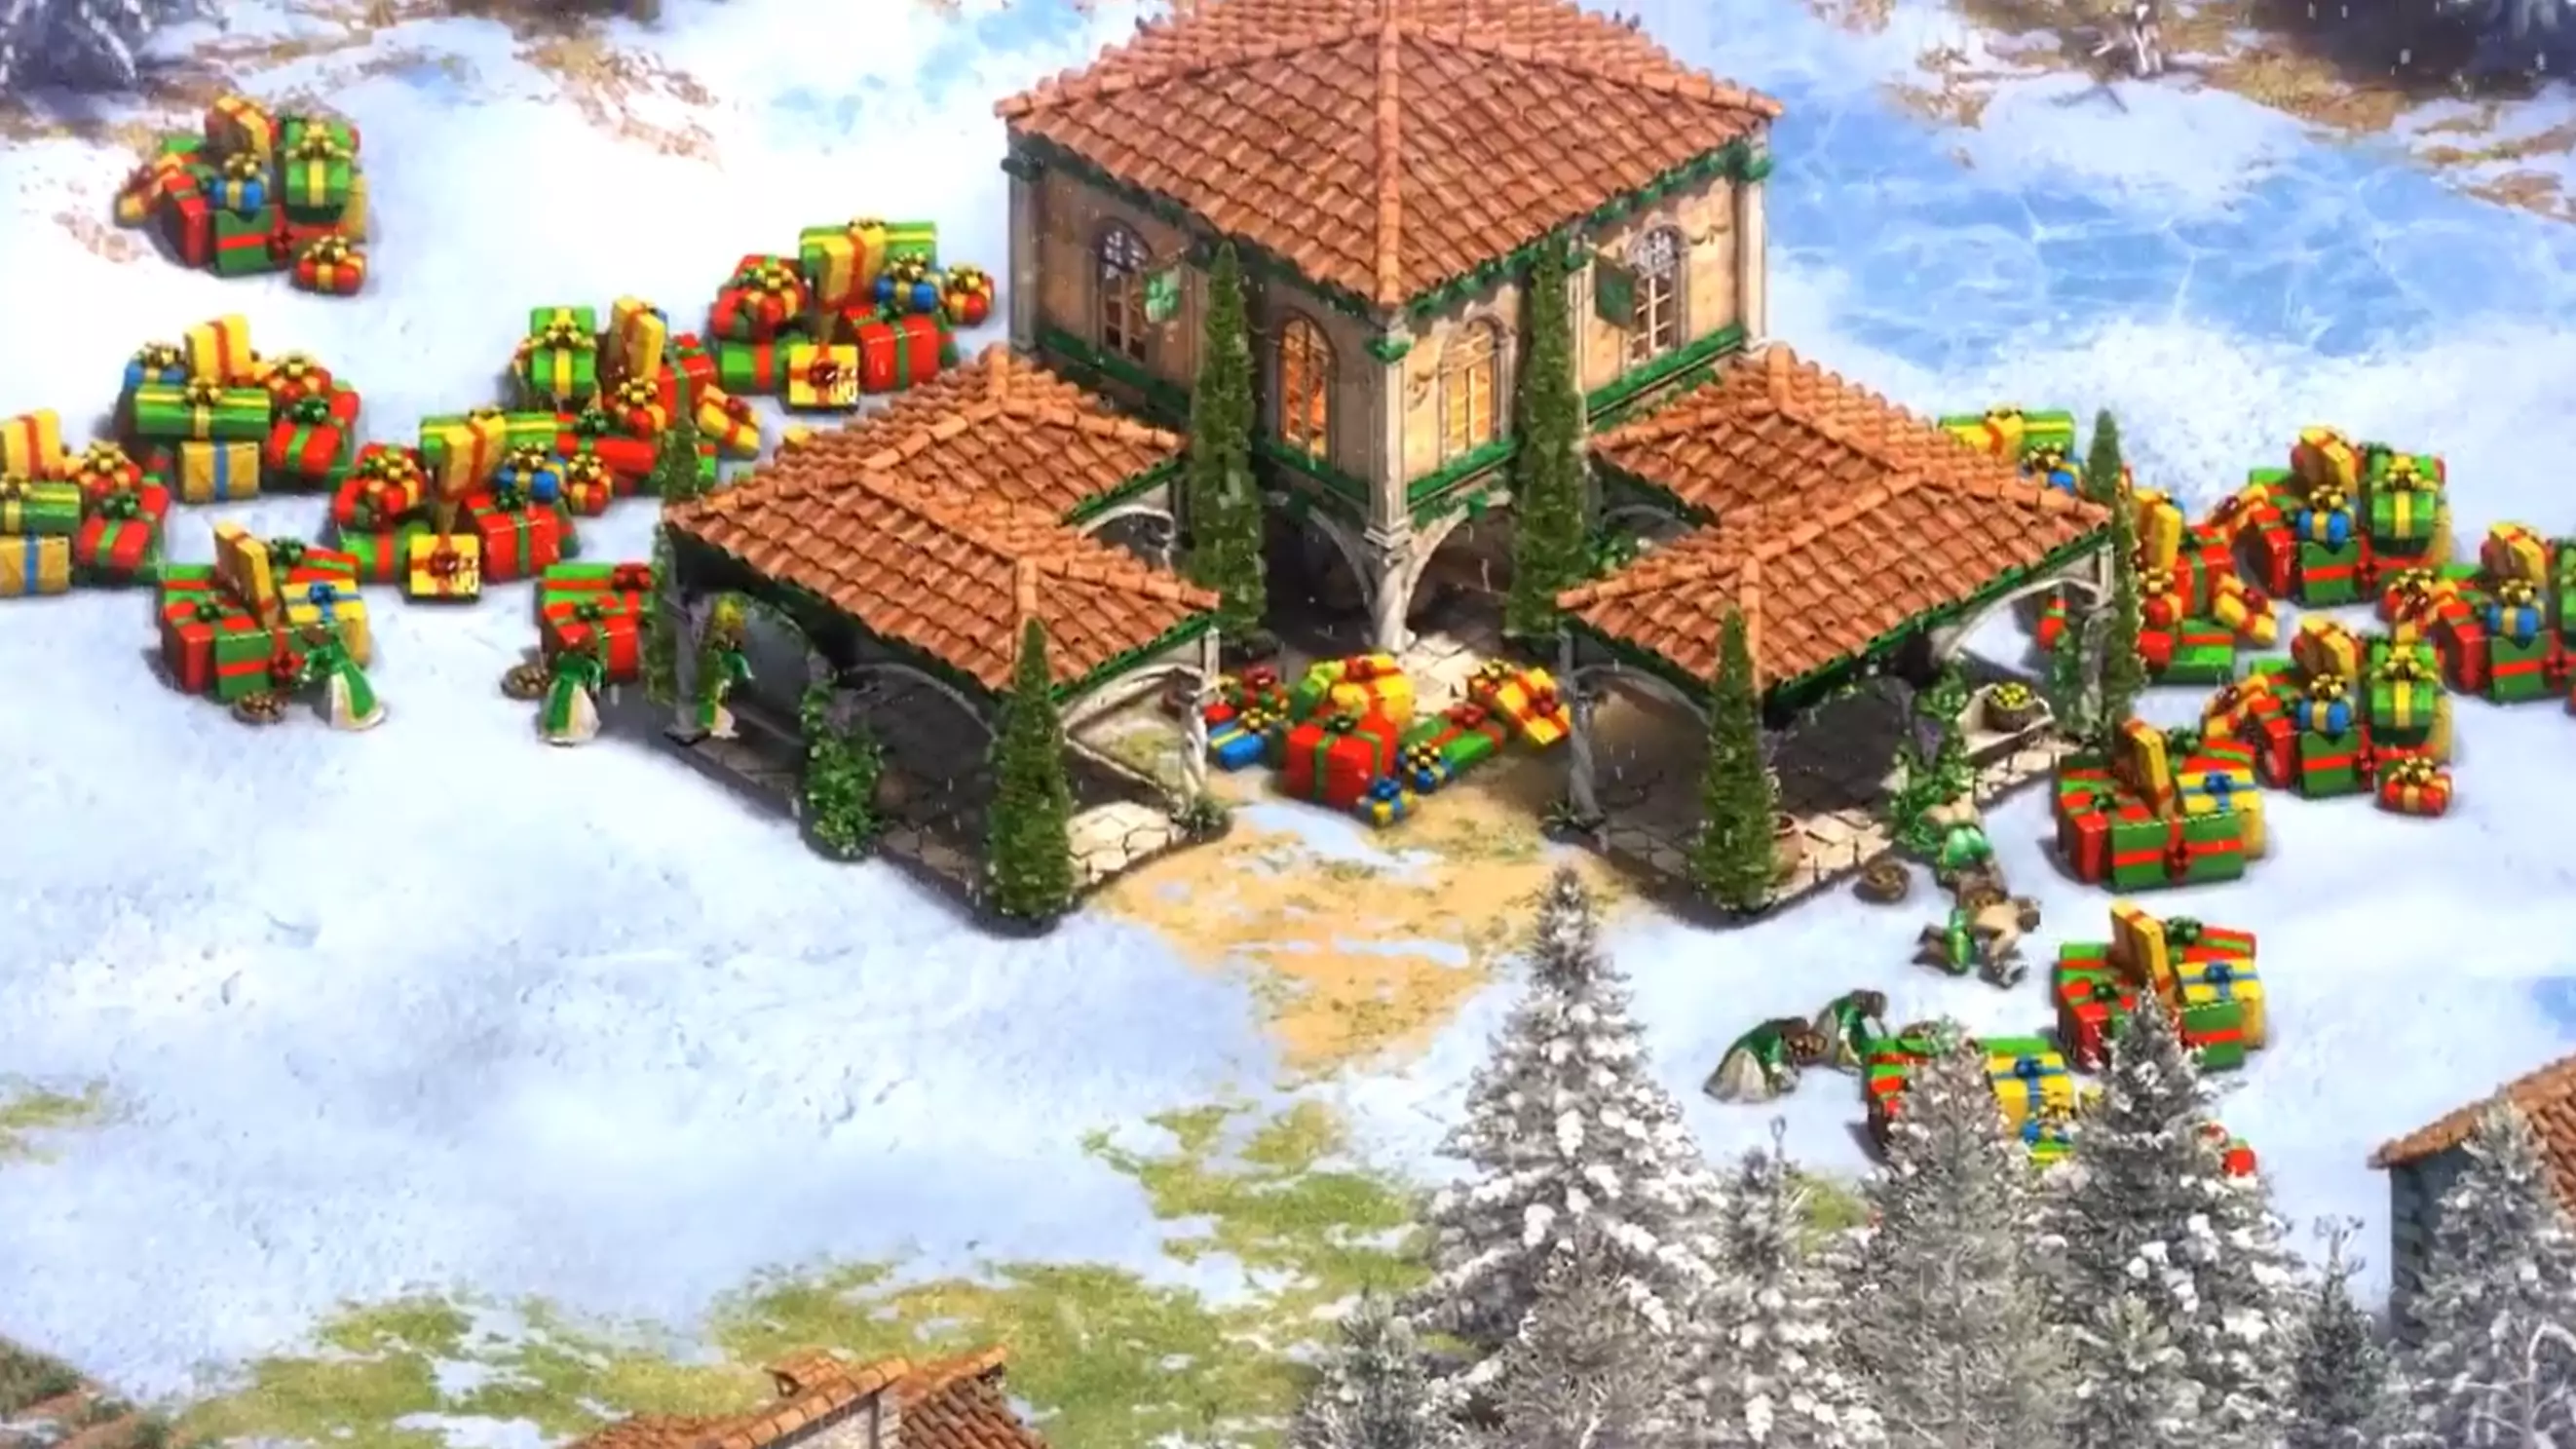 ​Wage Merry War In ‘Age Of Empires 2’ With The Christmas Mod